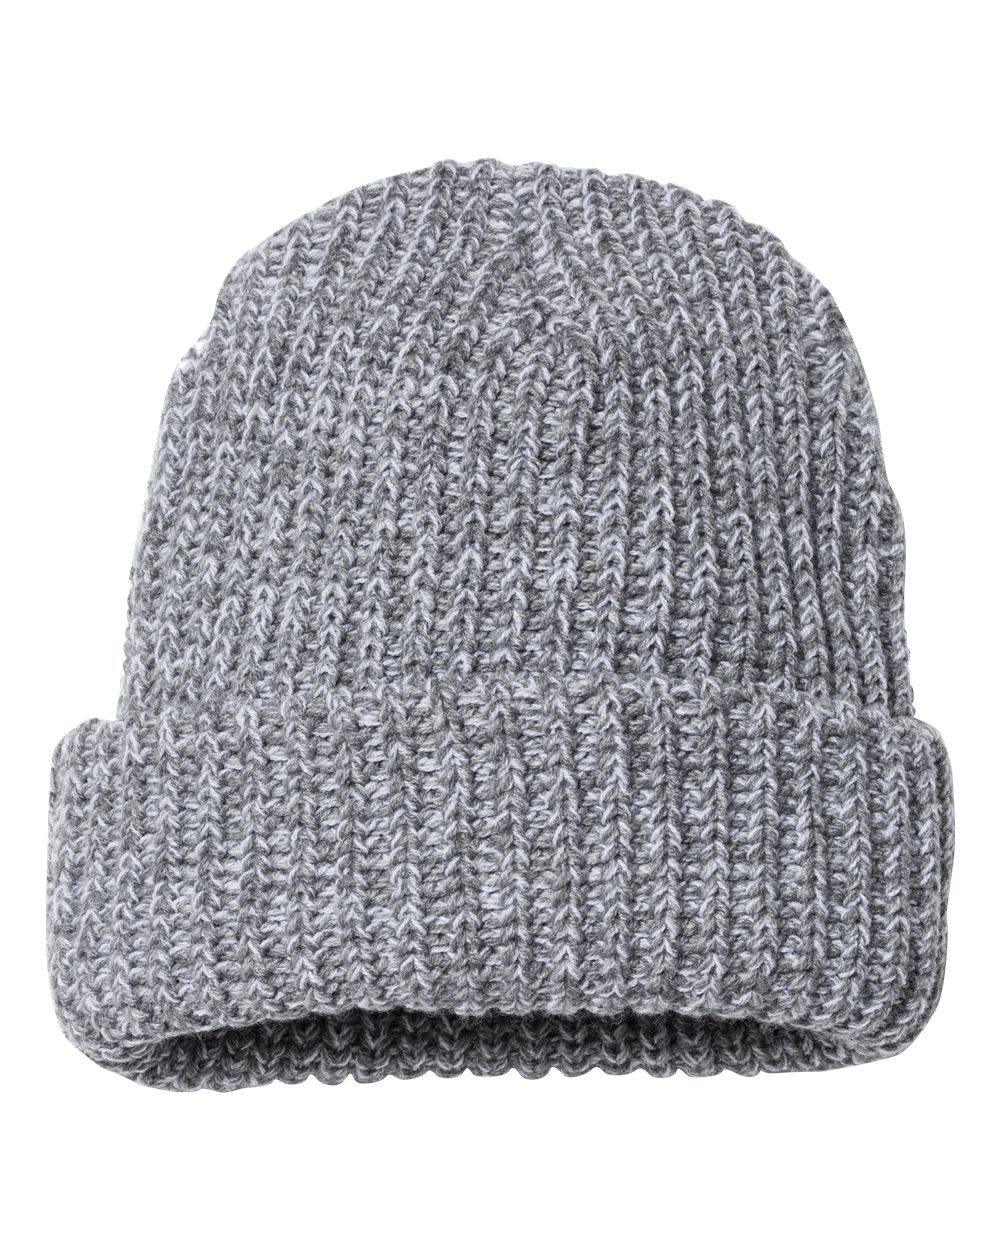 Embroidered Chunky Knit Beanies - Constantly Create Shop